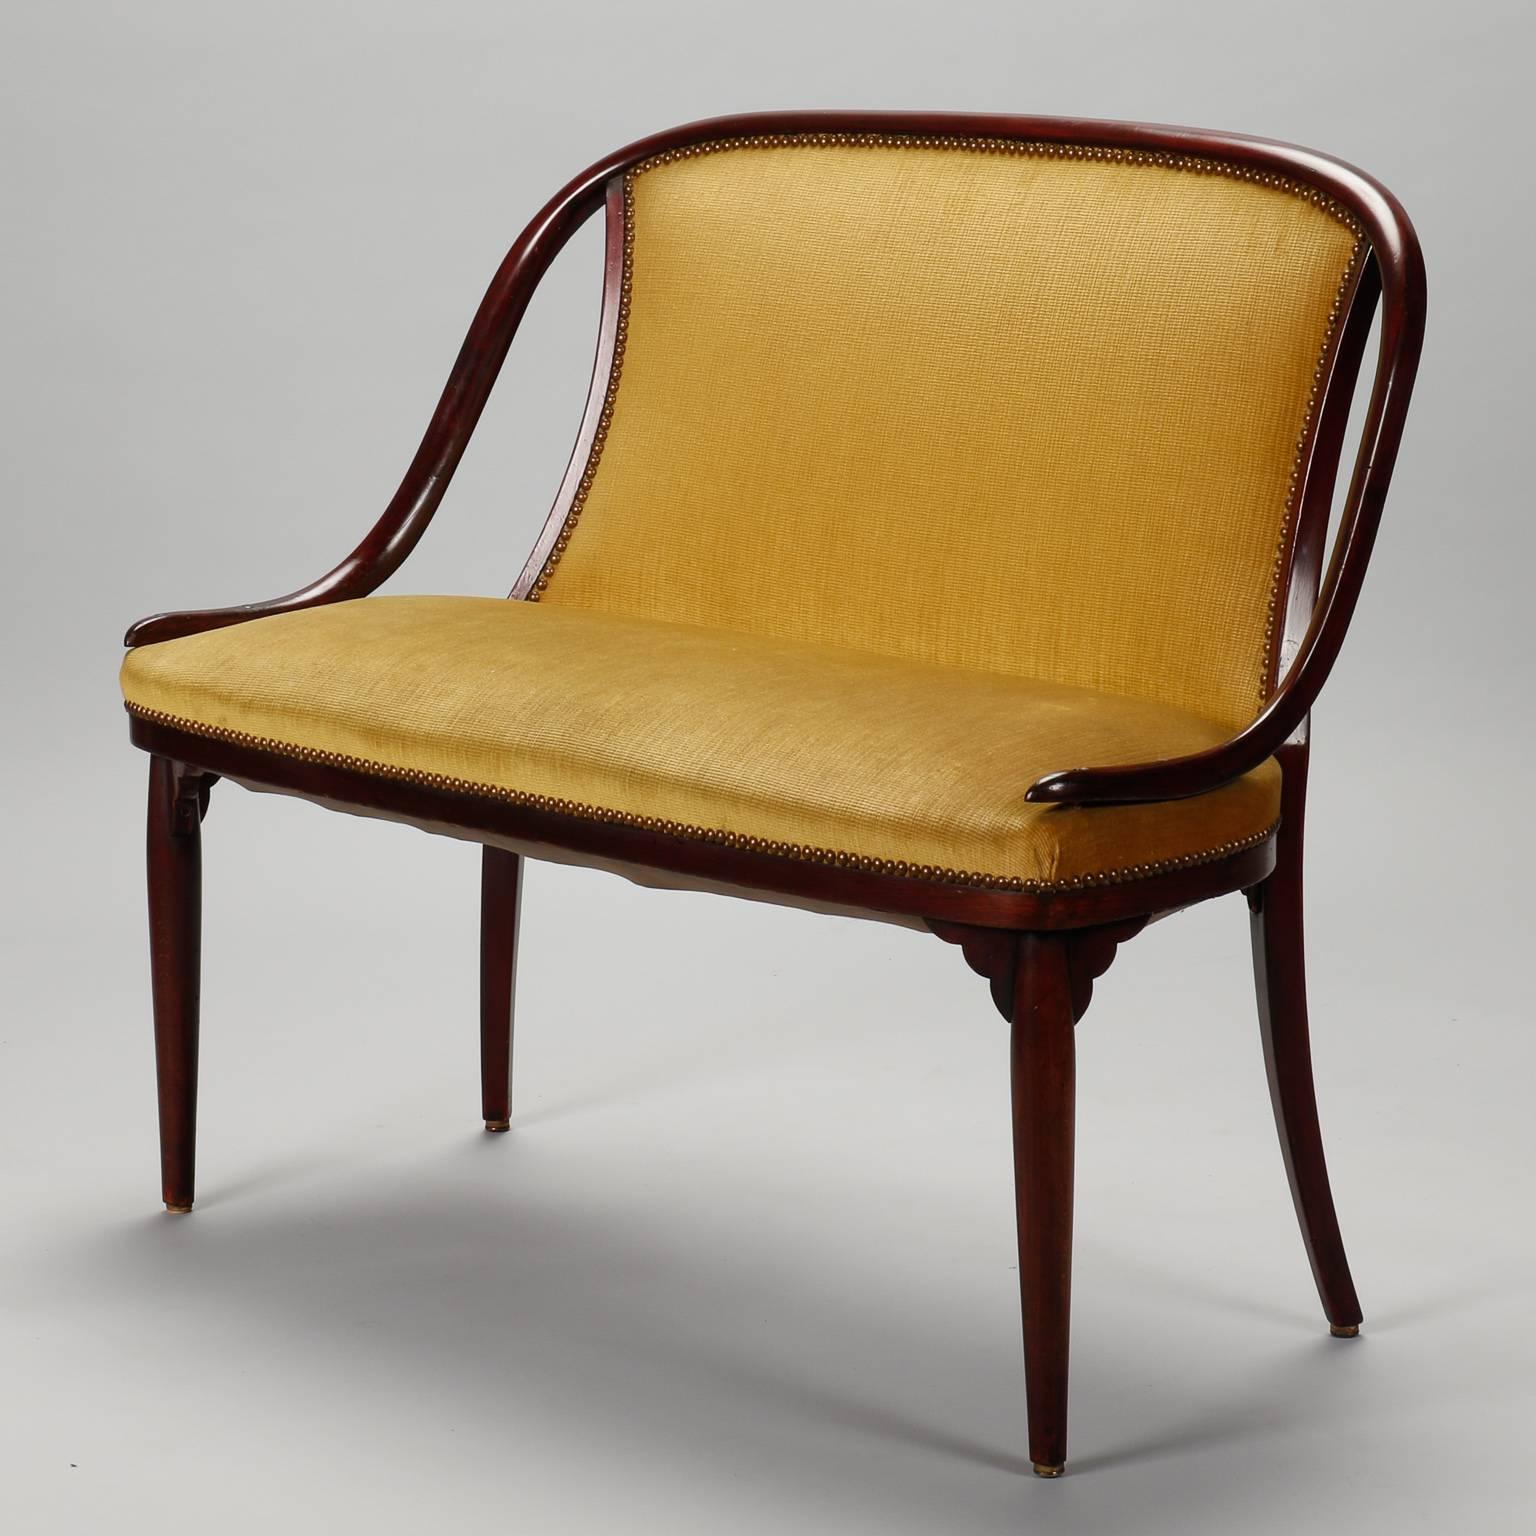 Stained Thonet Settee with Mustard Color Fabric